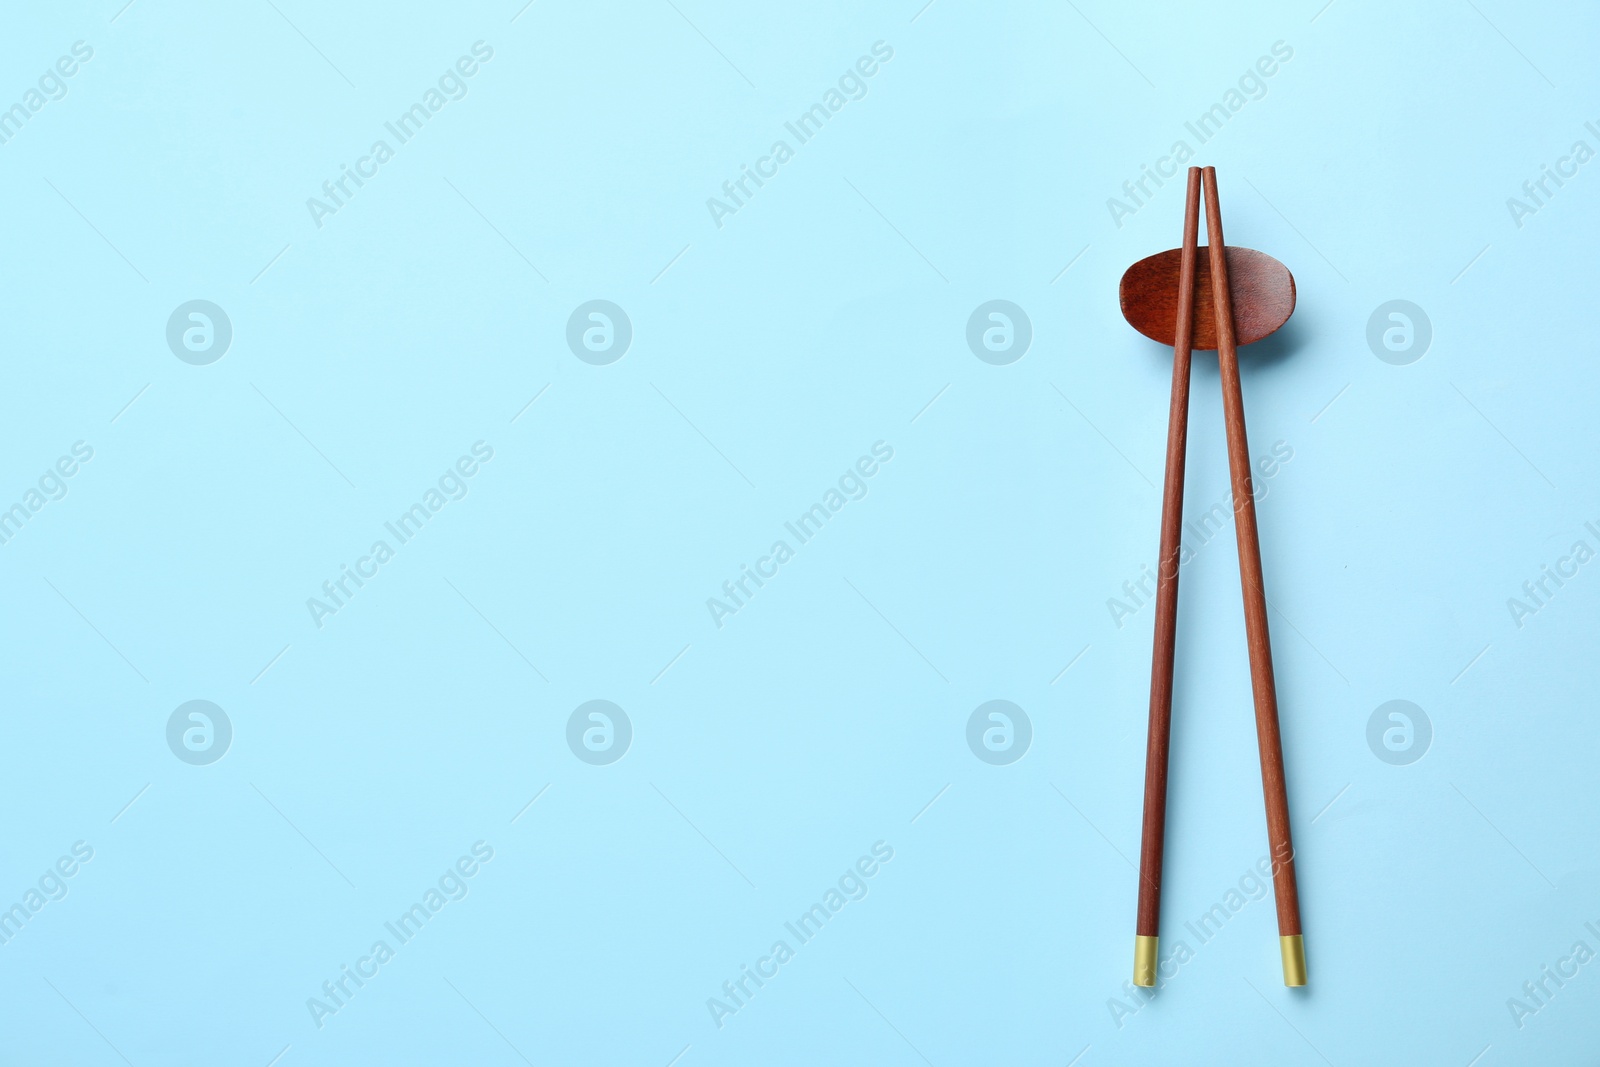 Photo of Pair of wooden chopsticks and rest on light blue background, top view. Space for text